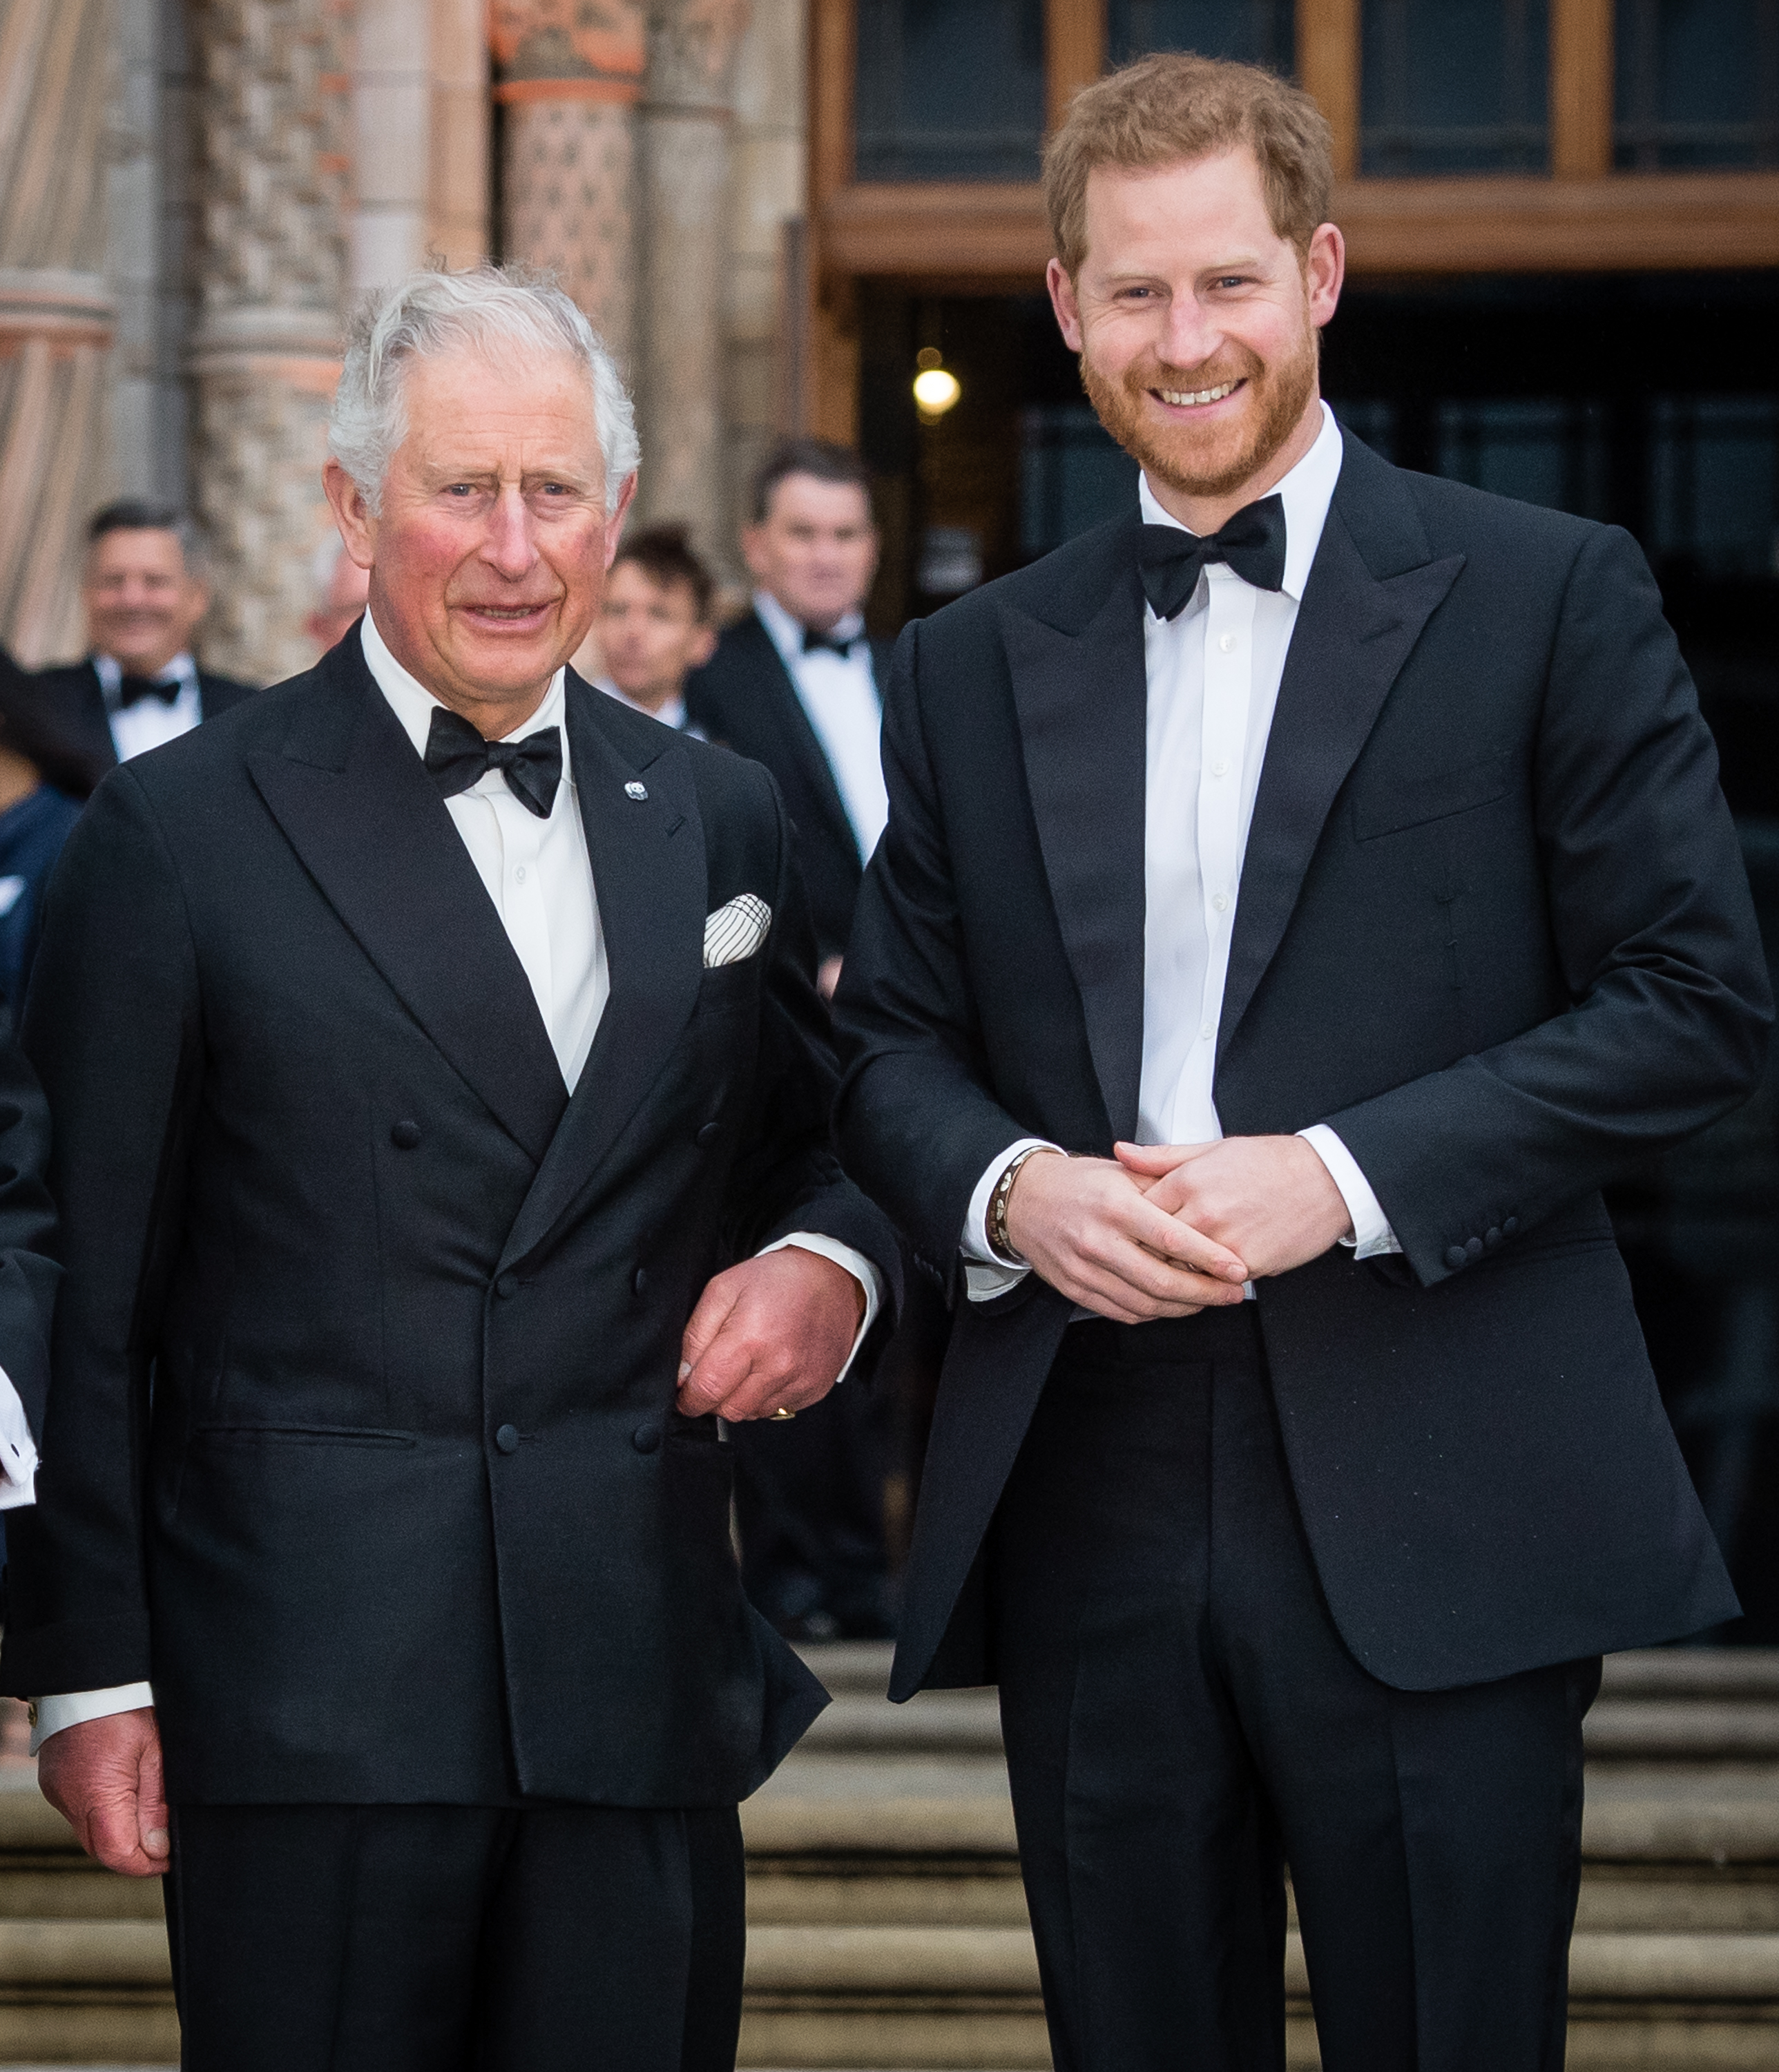 Prince Charles, Prince of Wales and Prince Harry, Duke of Sussex attend the "Our Planet" global premiere in London, England, on April 4, 2019. | Source: Getty Images